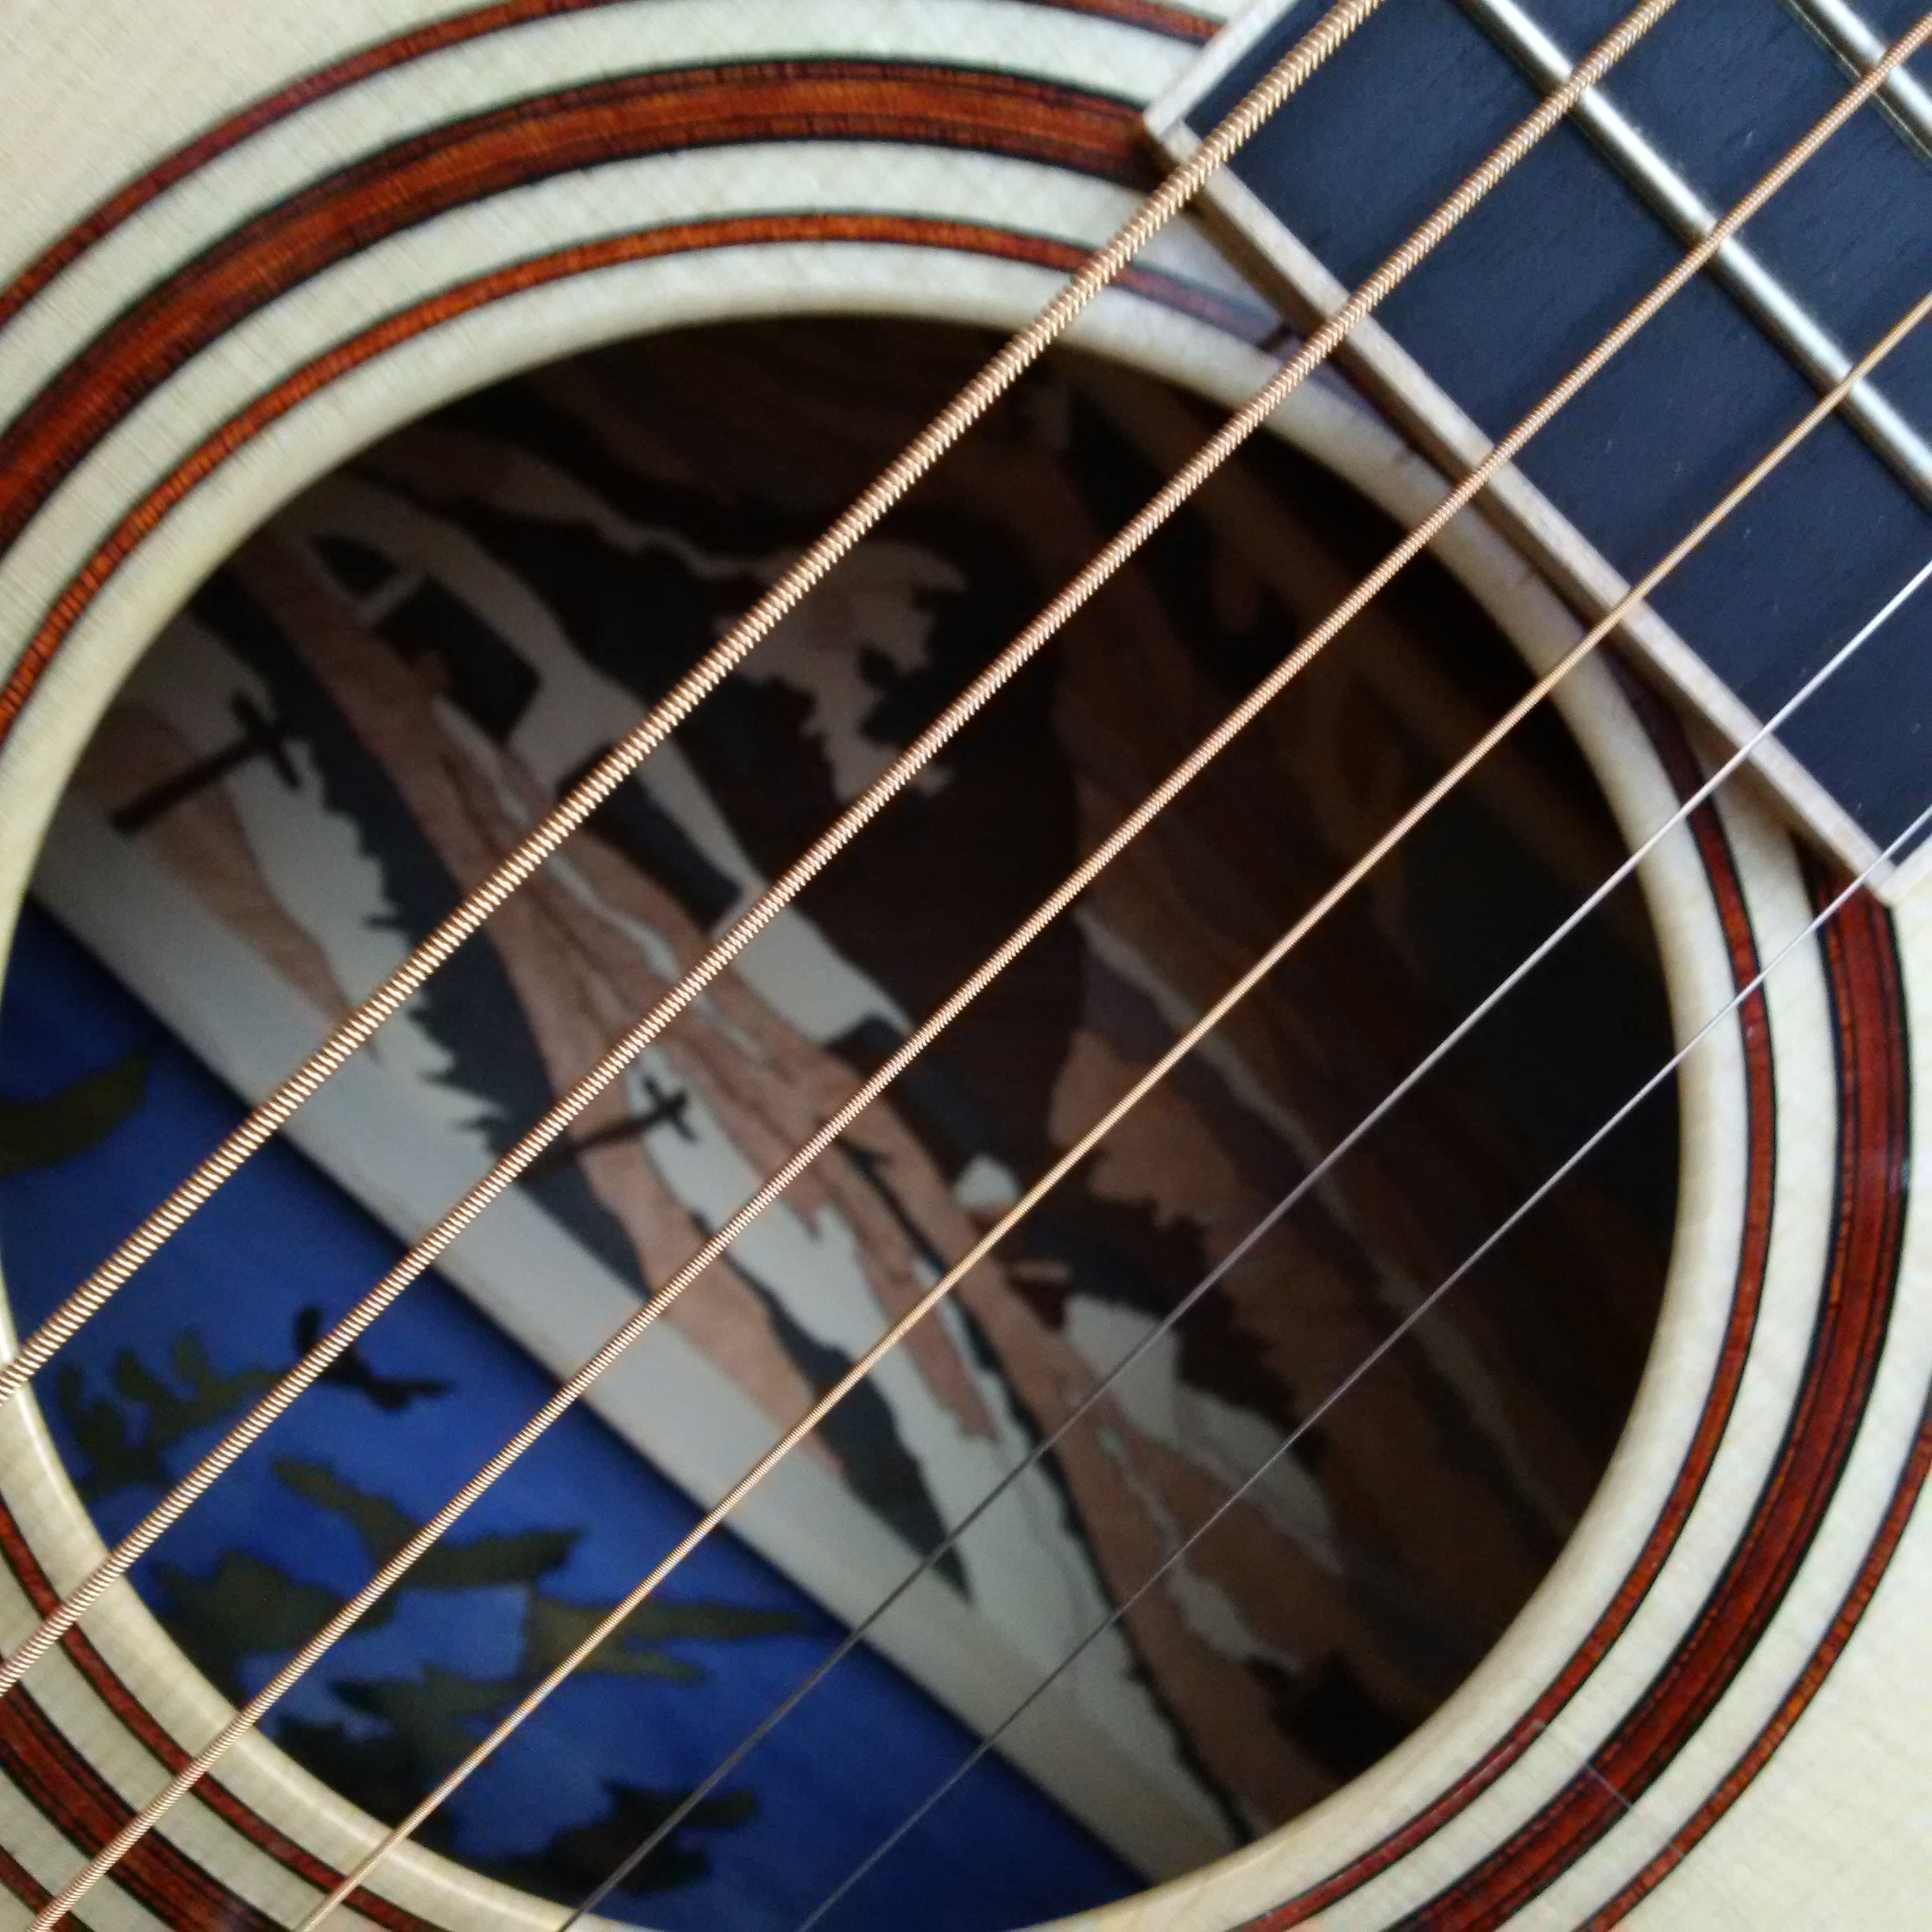 Extreme close up photograph into the interior of a guitar, also showing the sound hole, strings and part of the fretboard. There is a landscape image in the interior in blue, white, black and beige. There are three dark brown circles around the sound hole. The fretboard is dark blue.